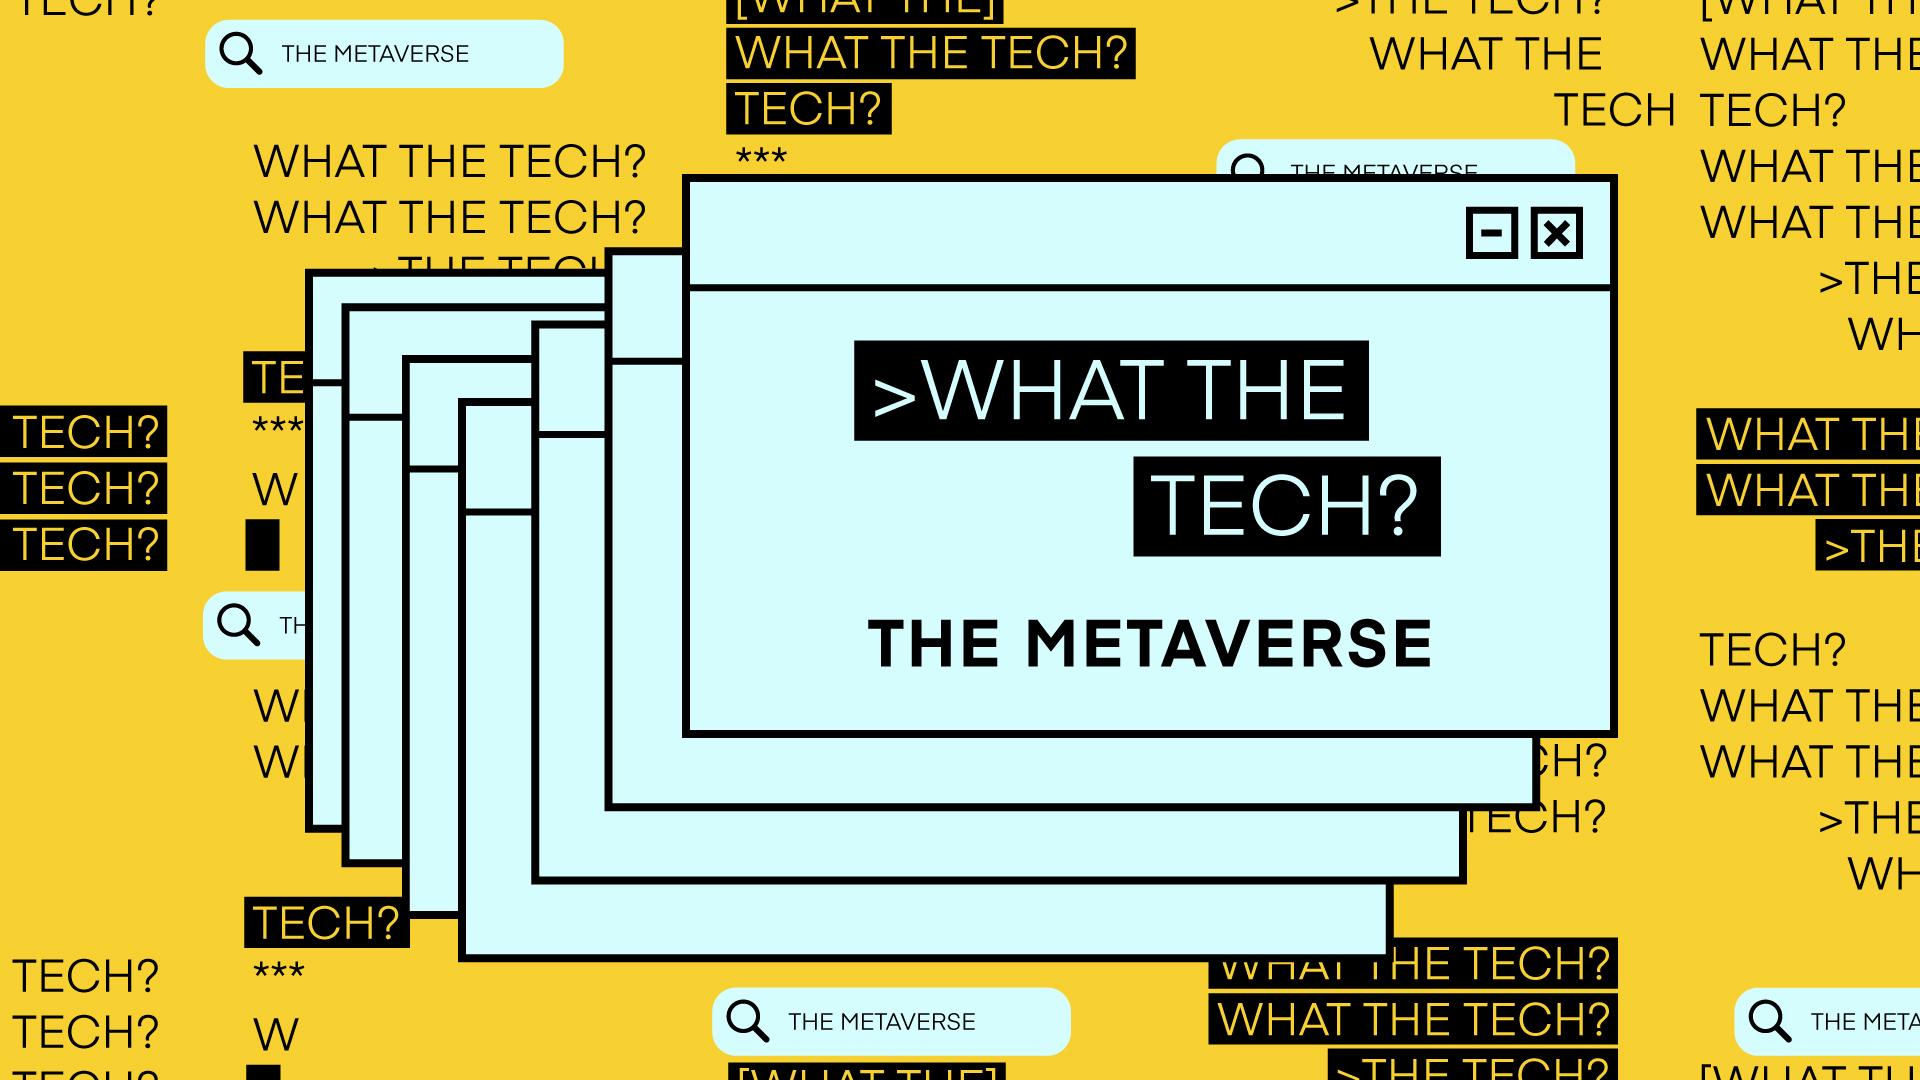 What the Tech is the metaverse